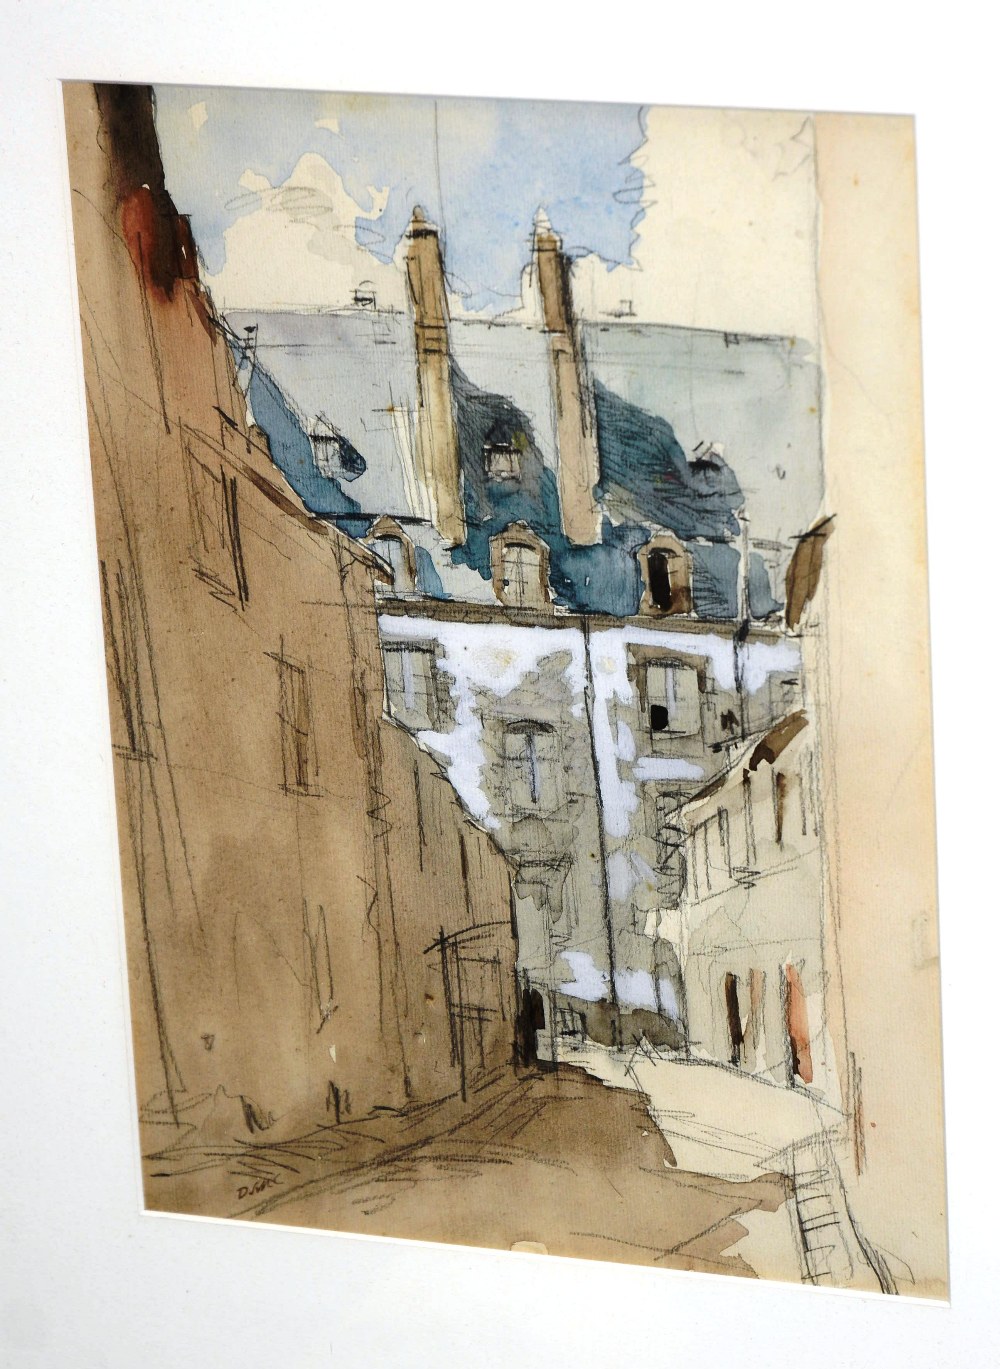 Dougal Sutherland MacCall, (1859-1949)
'Roof at Dinan'
Pencil and watercolour, signed bottom left